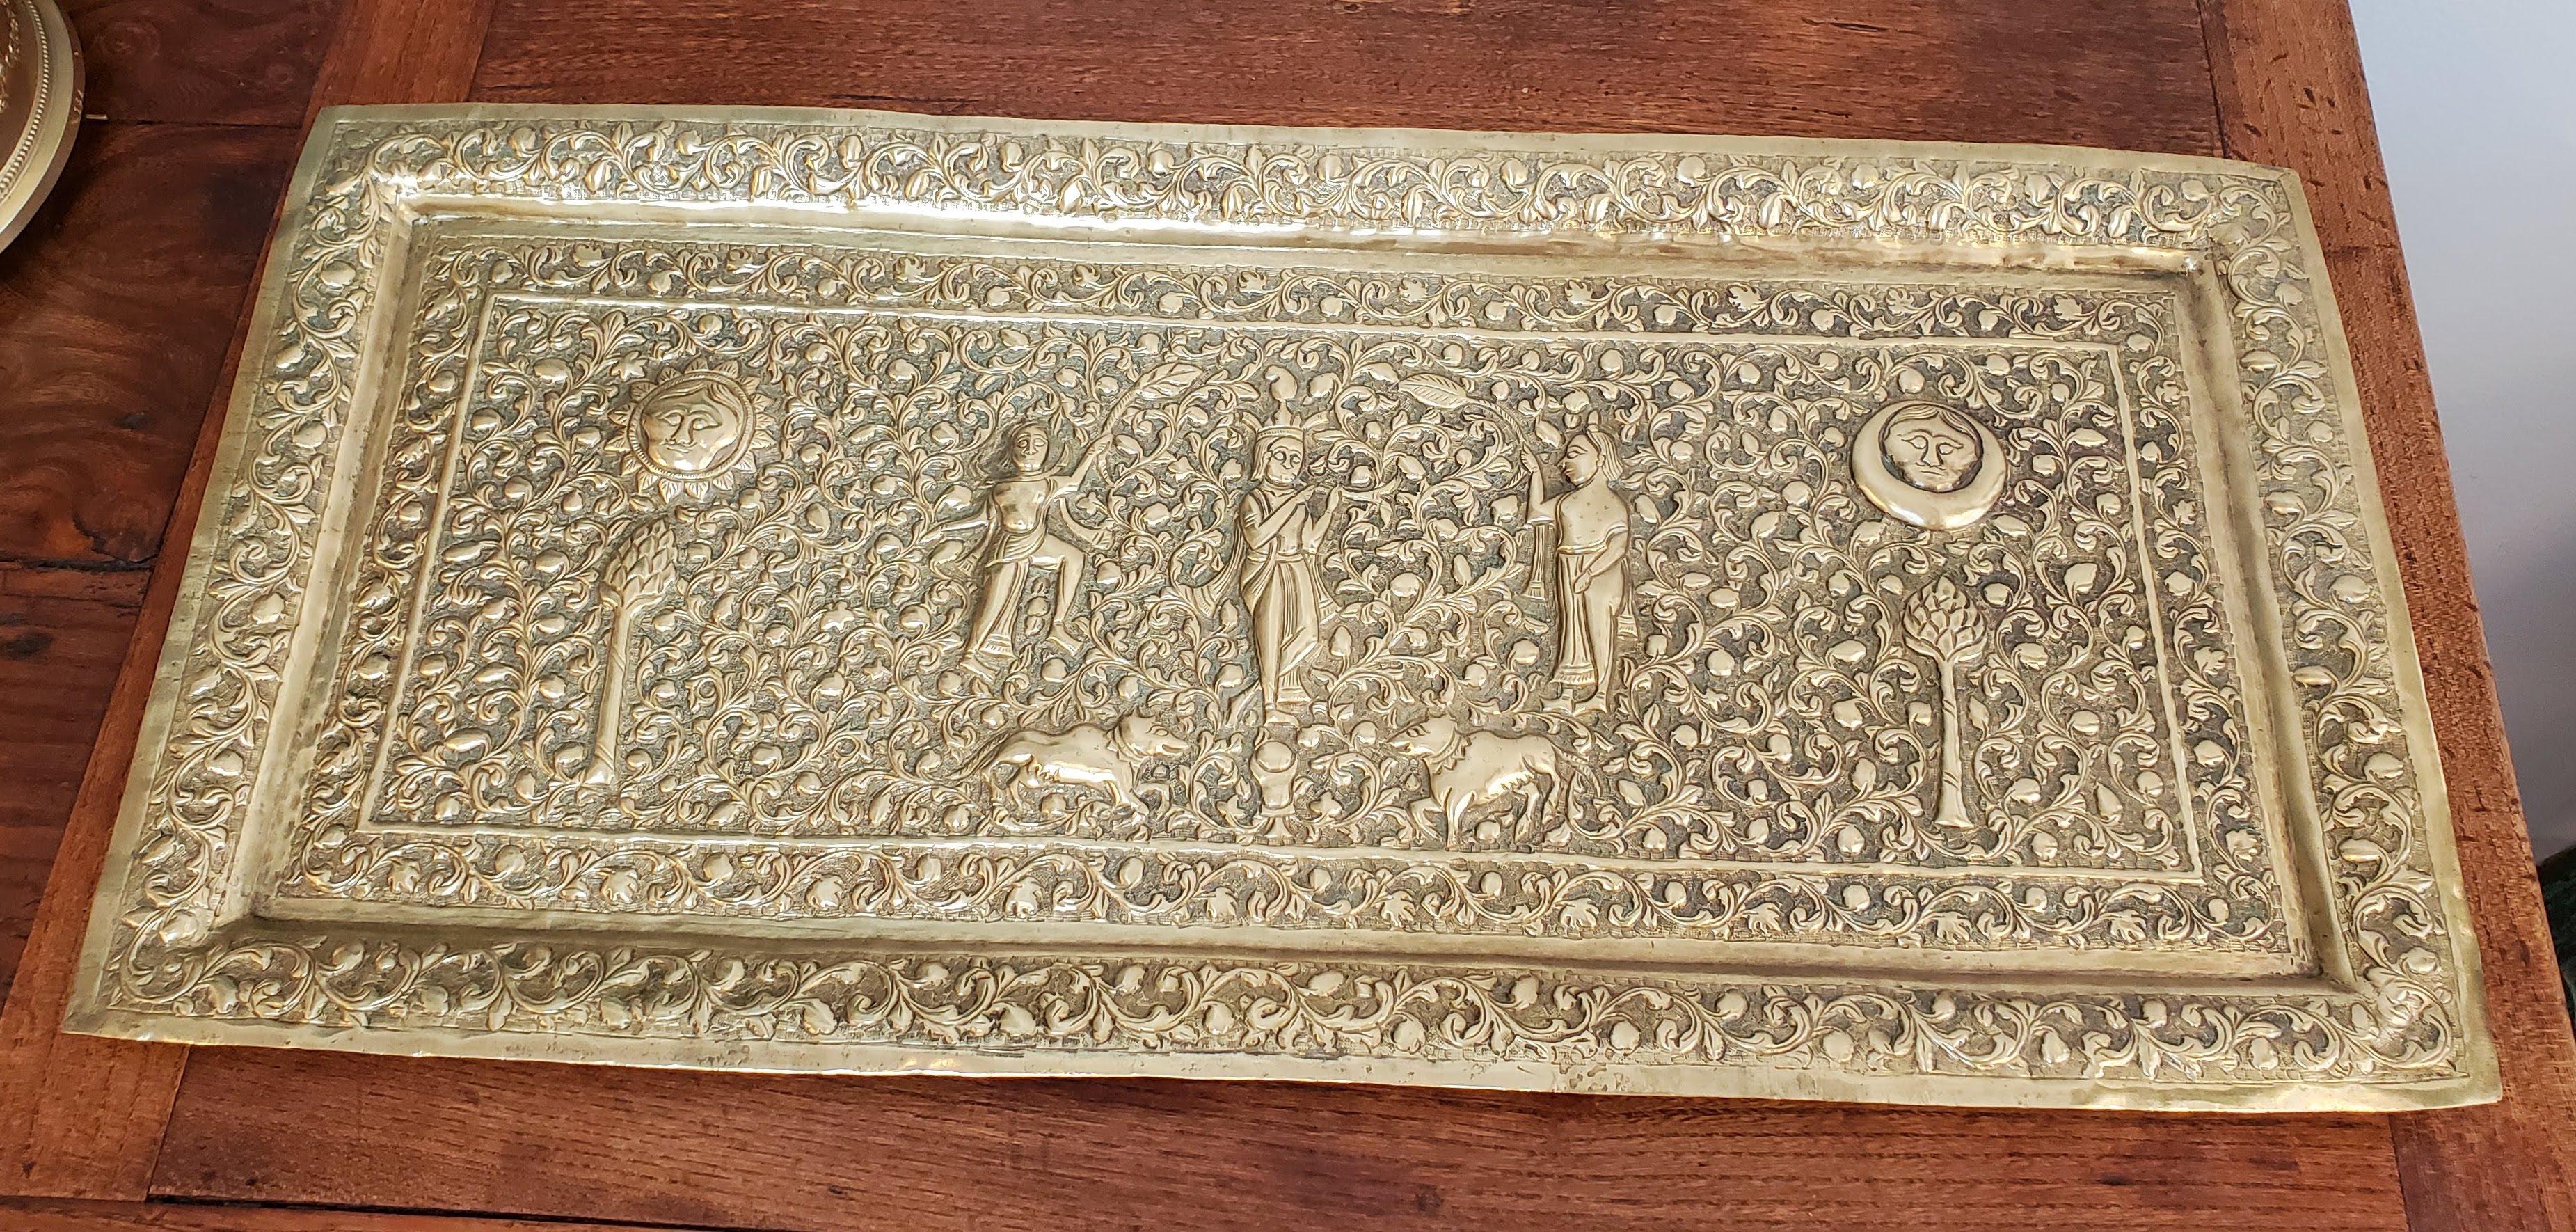 19th century Indian brass platter. Heavily embossed floral decoration, human figures, animals and Hindu deities. Unusual proportions. 
India, circa 1850.
Measures: 11.5” H 24” W 0.5” D.